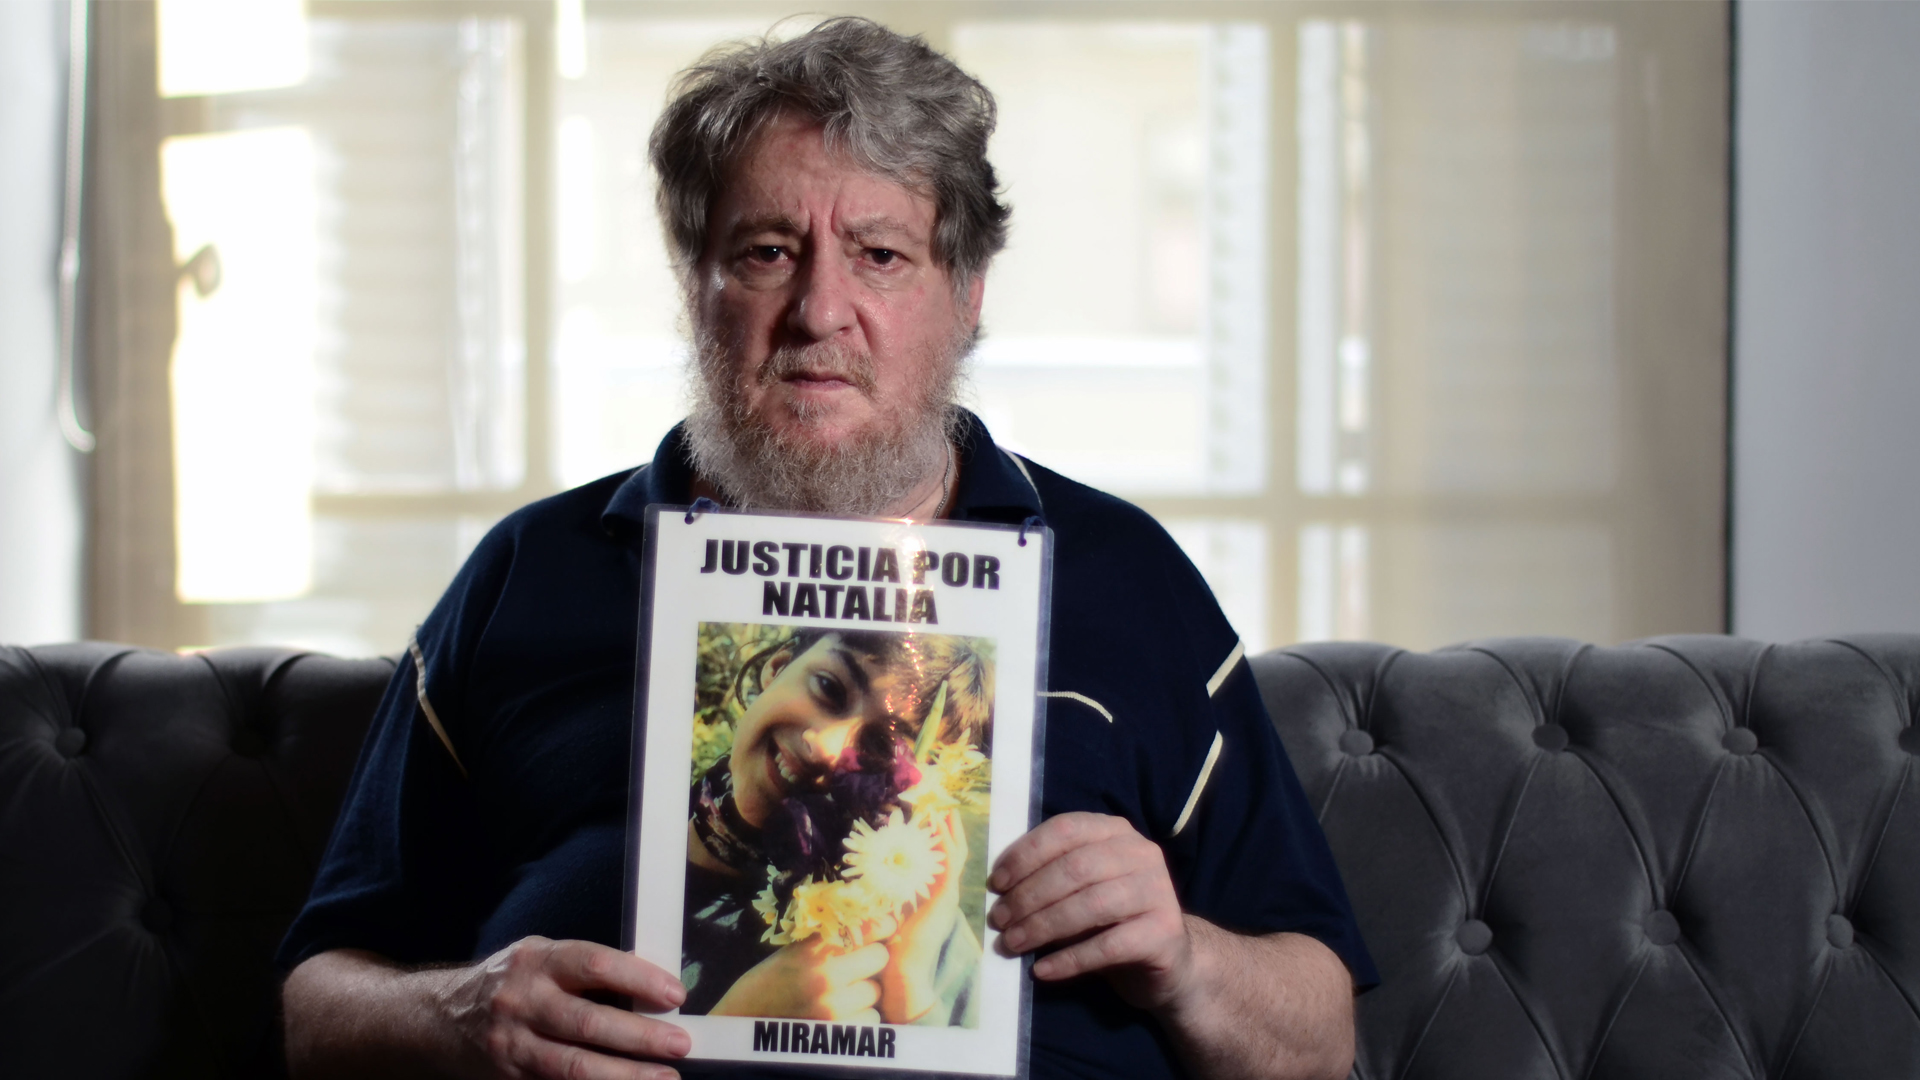 Natalia Melmann's father asks for justice for his daughter (Matías Arbotto)